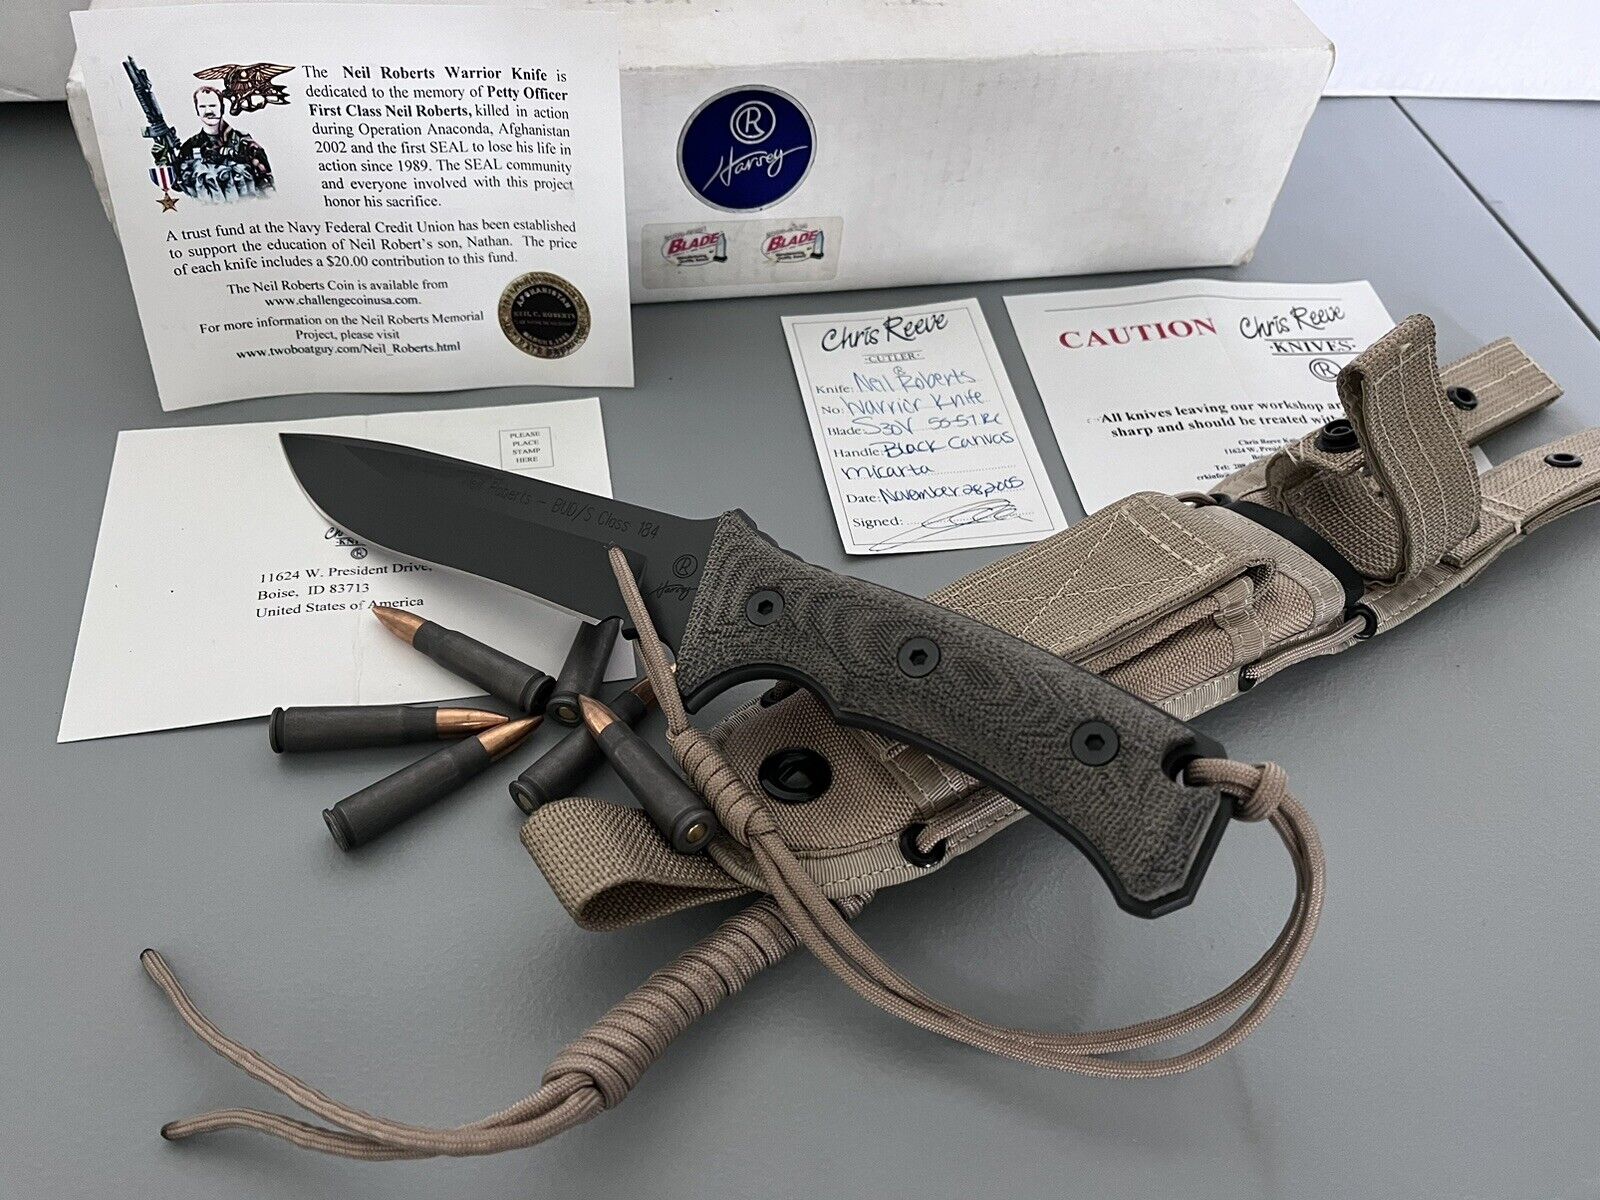 CHRIS REEVE WARRIOR KNIFE NAVY SEAL NEIL ROBERTS TRIBUTE KNIFE BUD/S CLASS 184